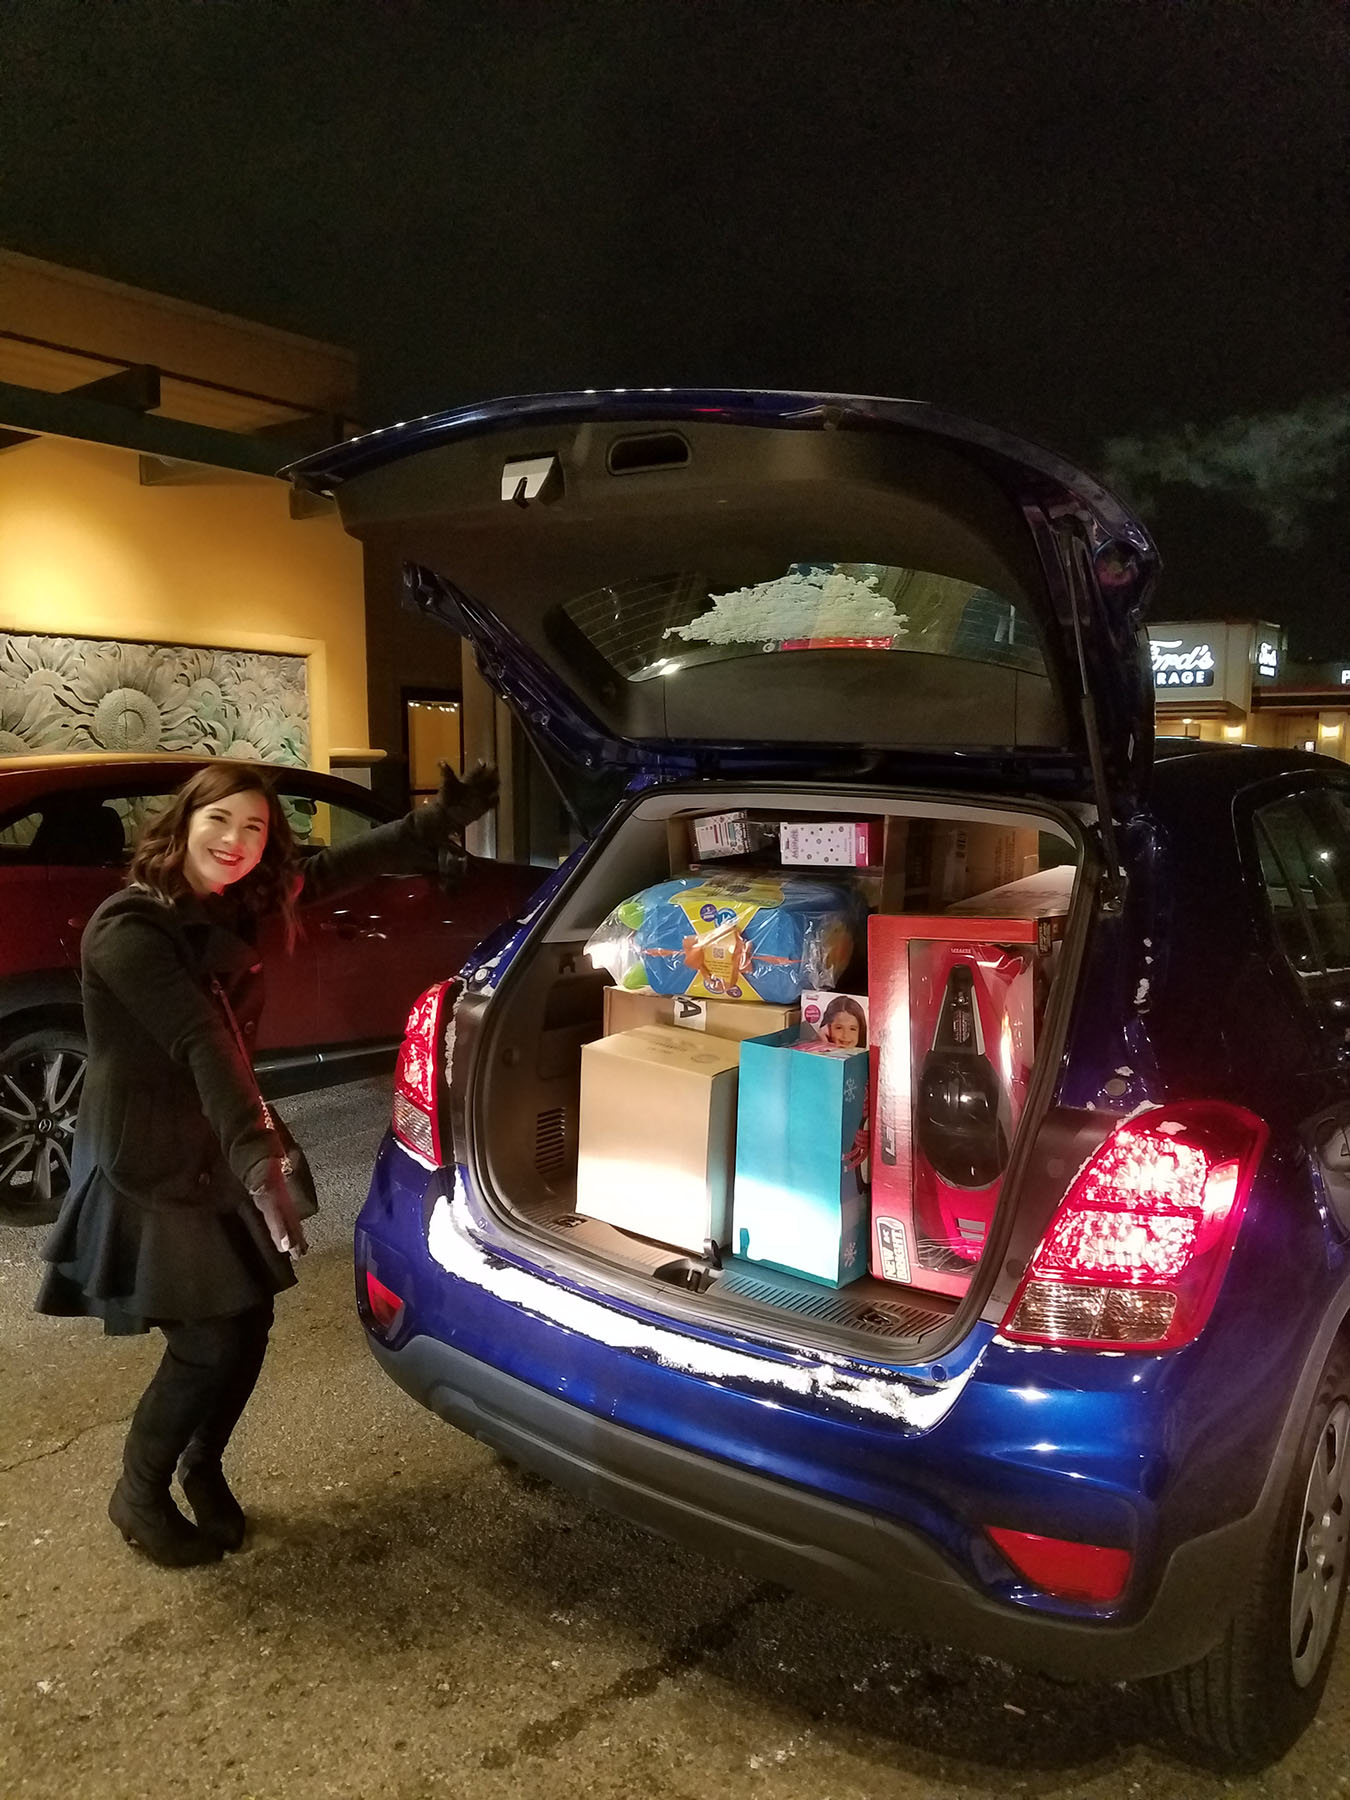 2017 - Toys all loaded up for Toys For Tots after our holiday client event